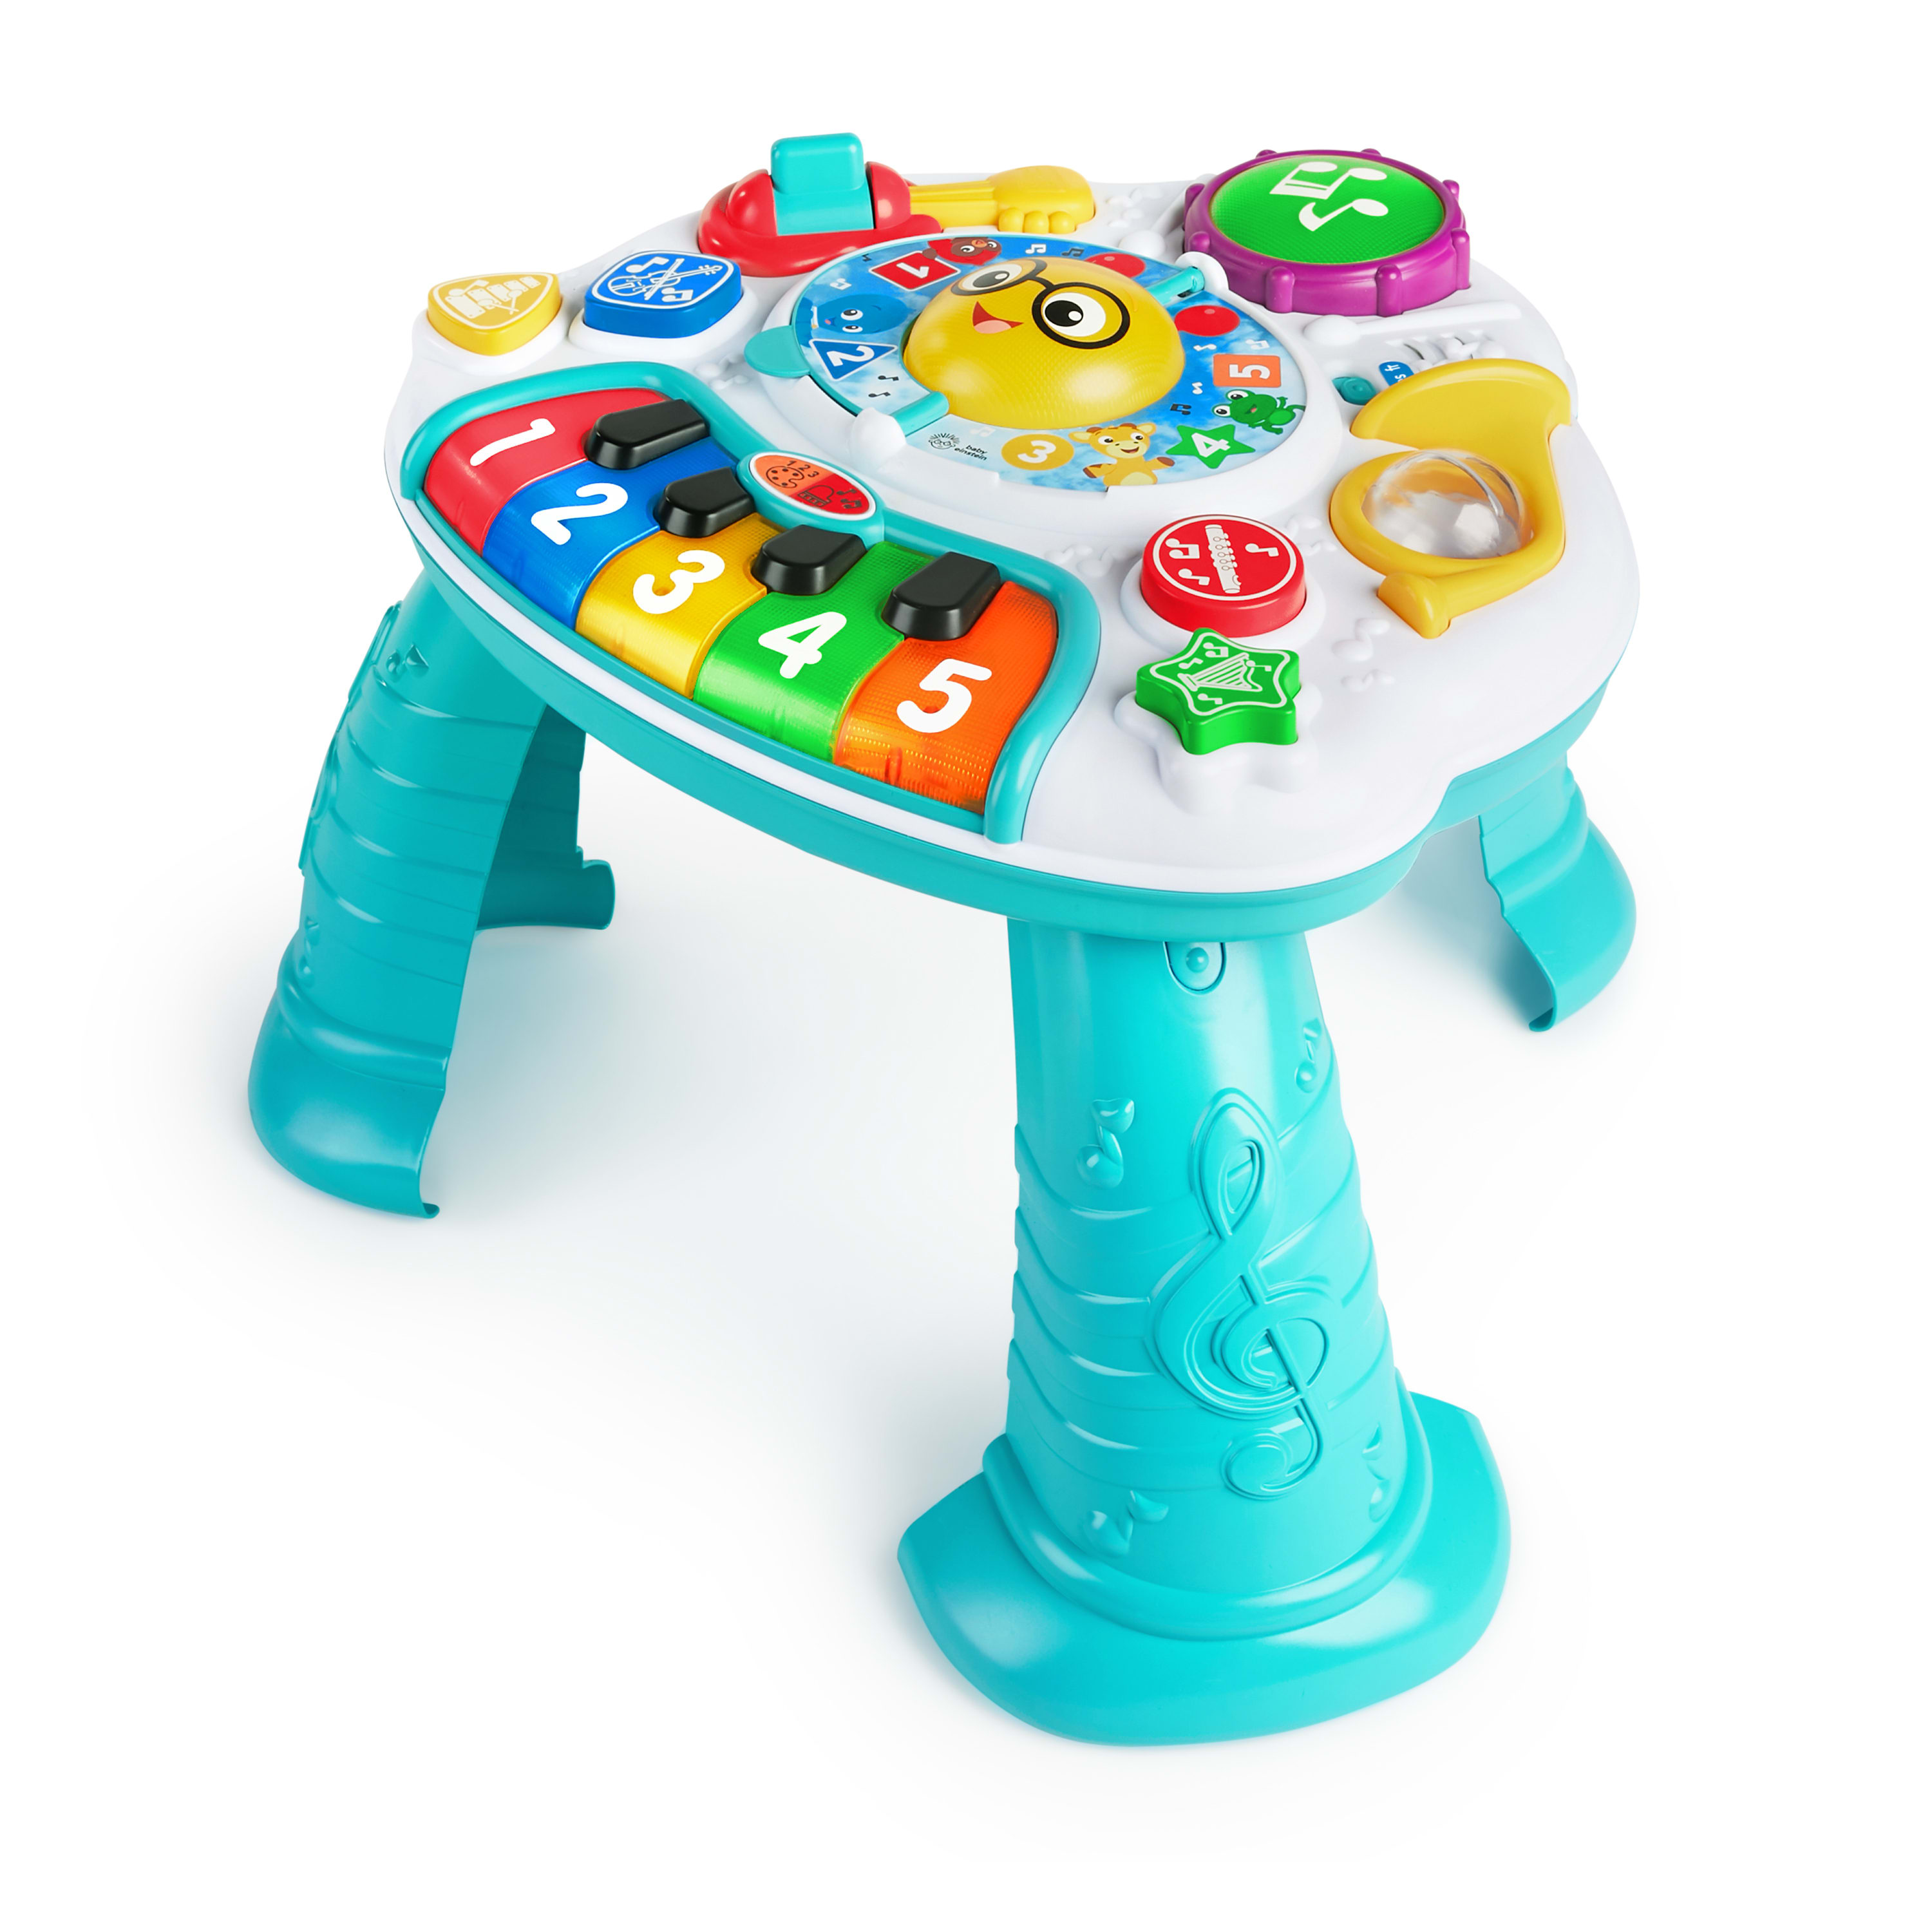 Baby Einstein Discovering Music Activity Table, Ages 6 months + - image 1 of 14